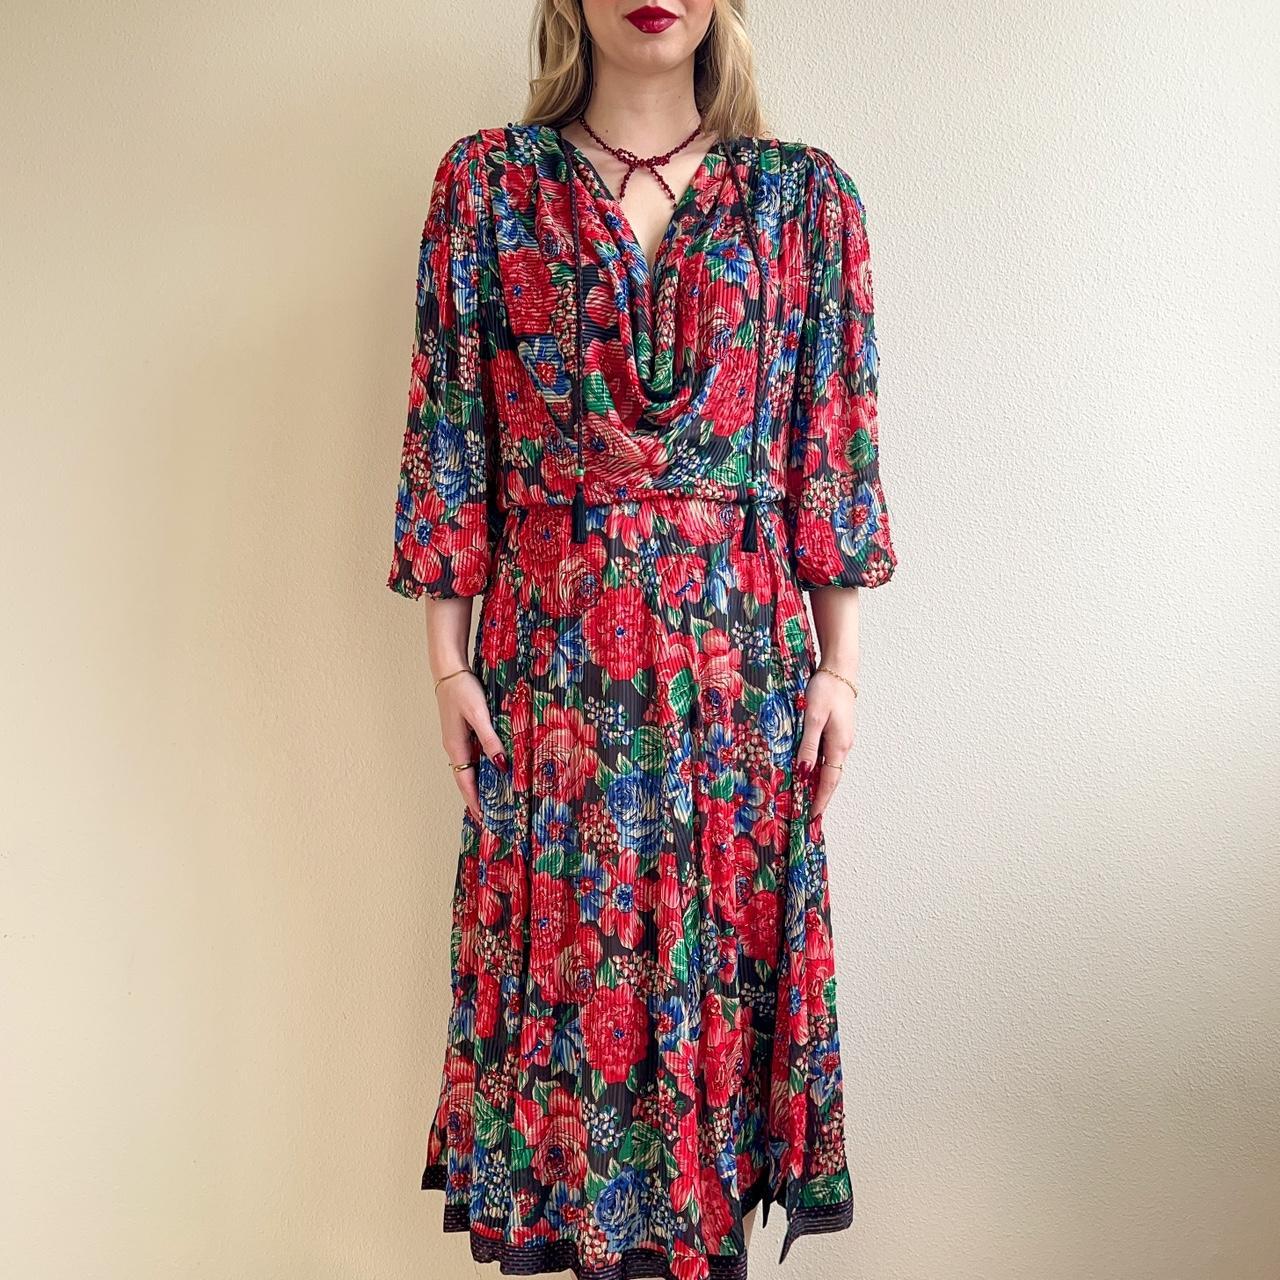 Vintage 1980s Diane Freis Red Floral Dress With